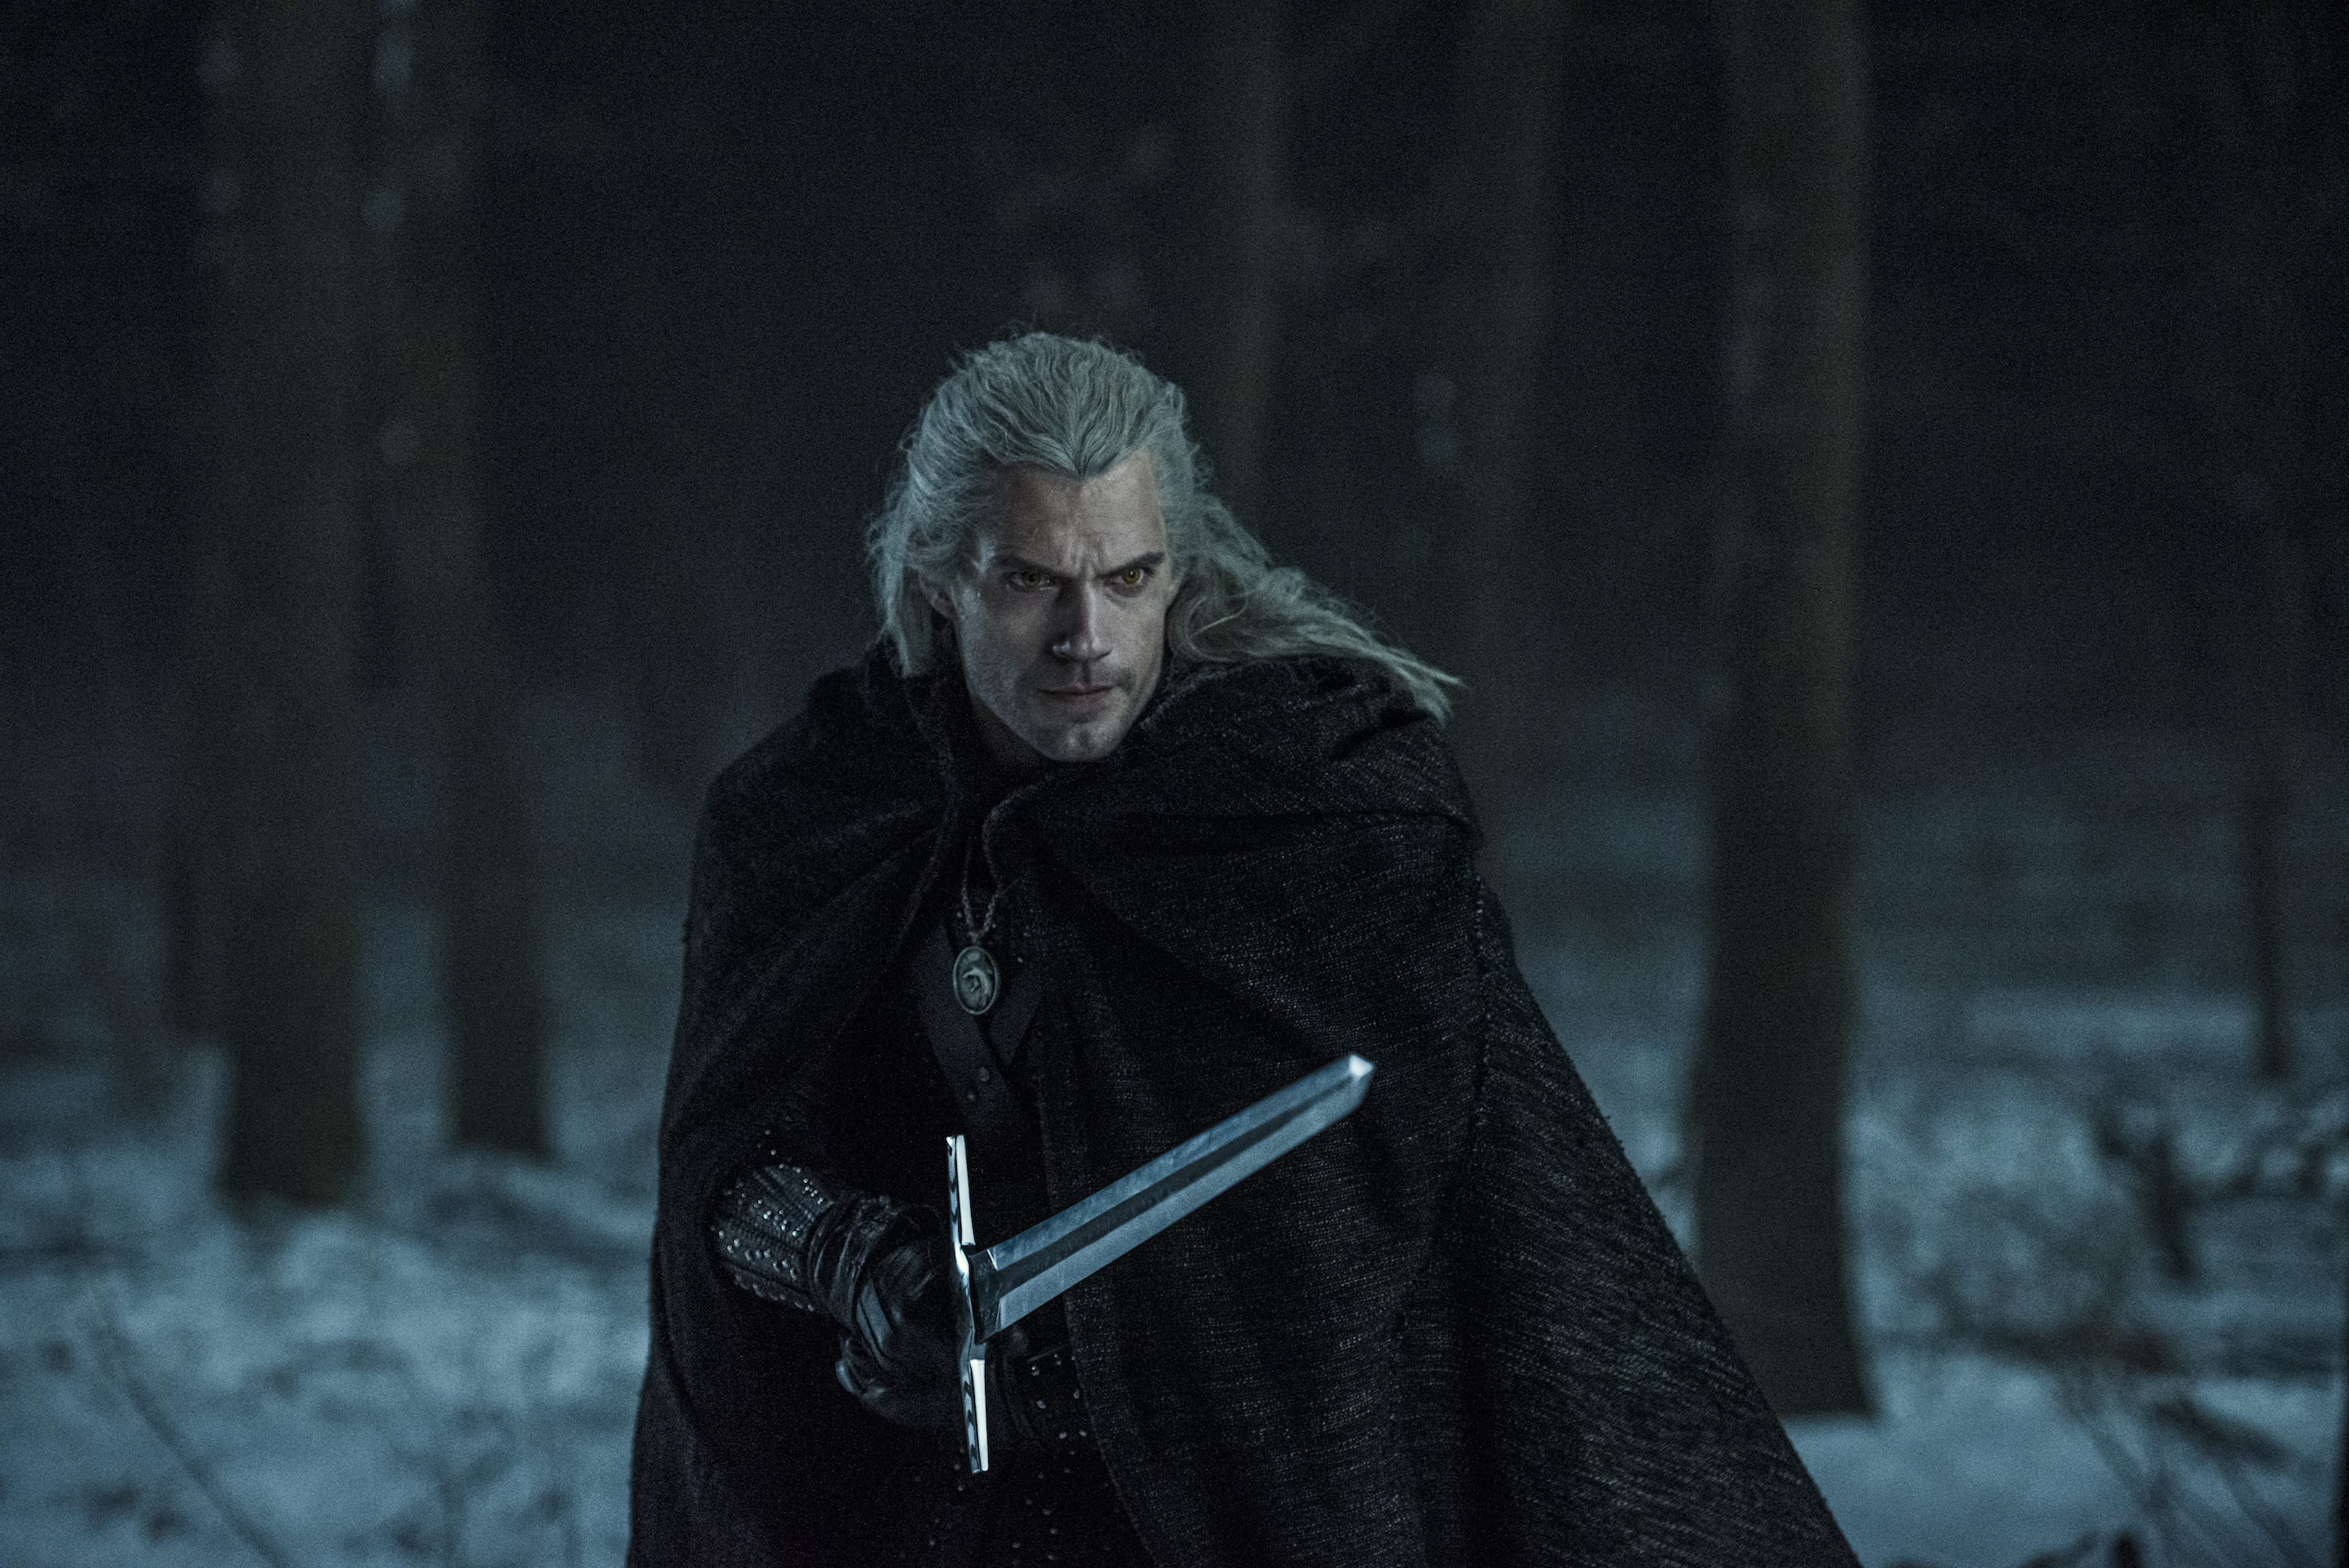 A man with long, white hair wields a sword.